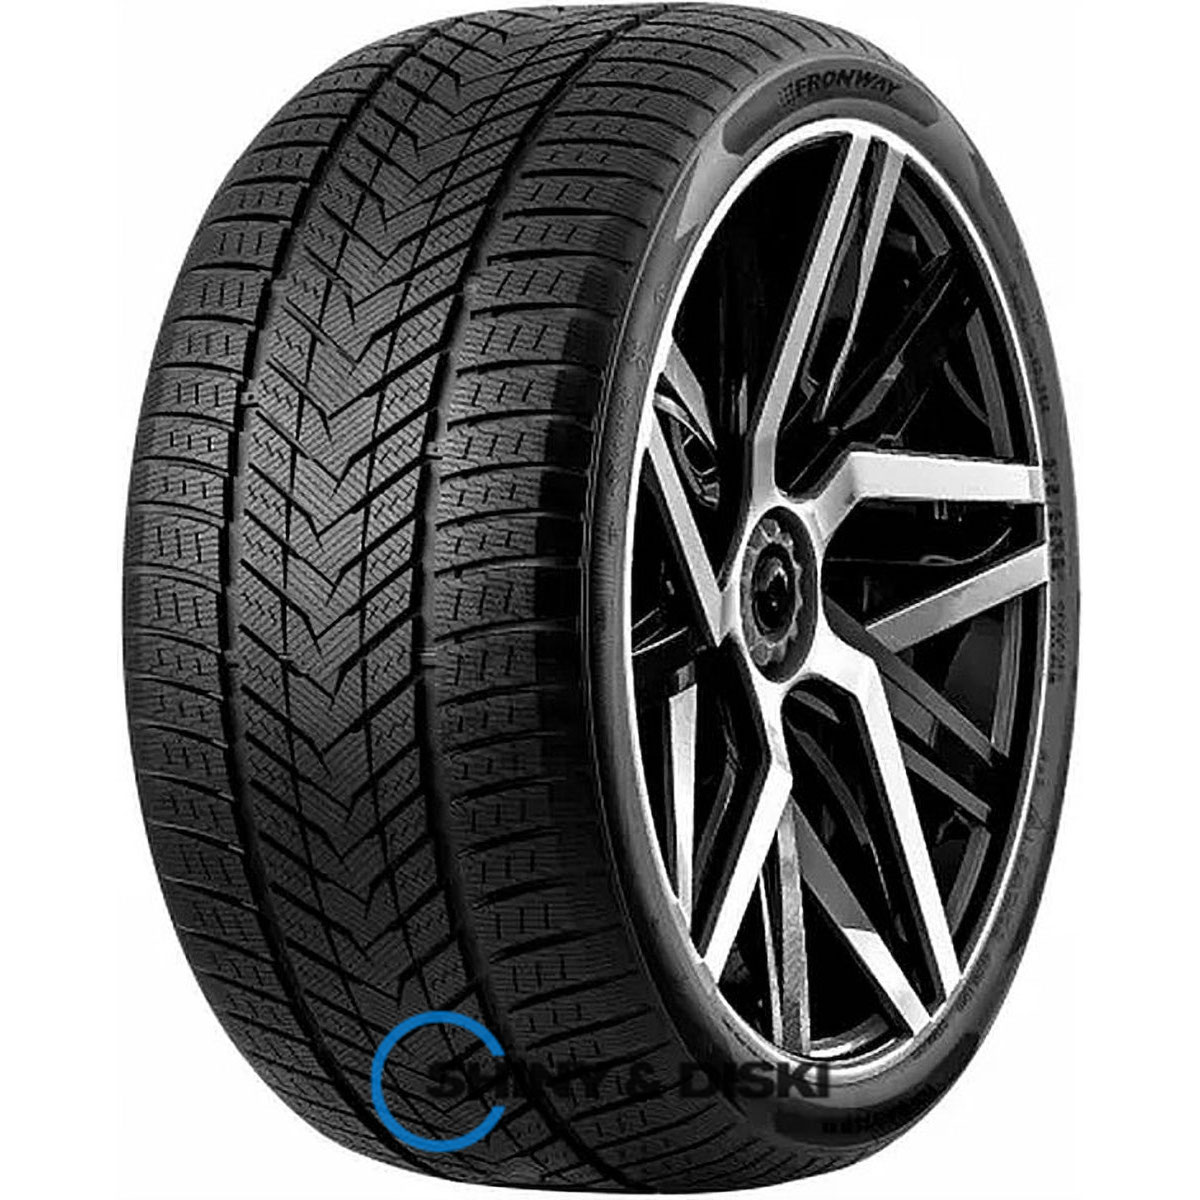 fronway icemaster ii 275/40 r19 105v xl